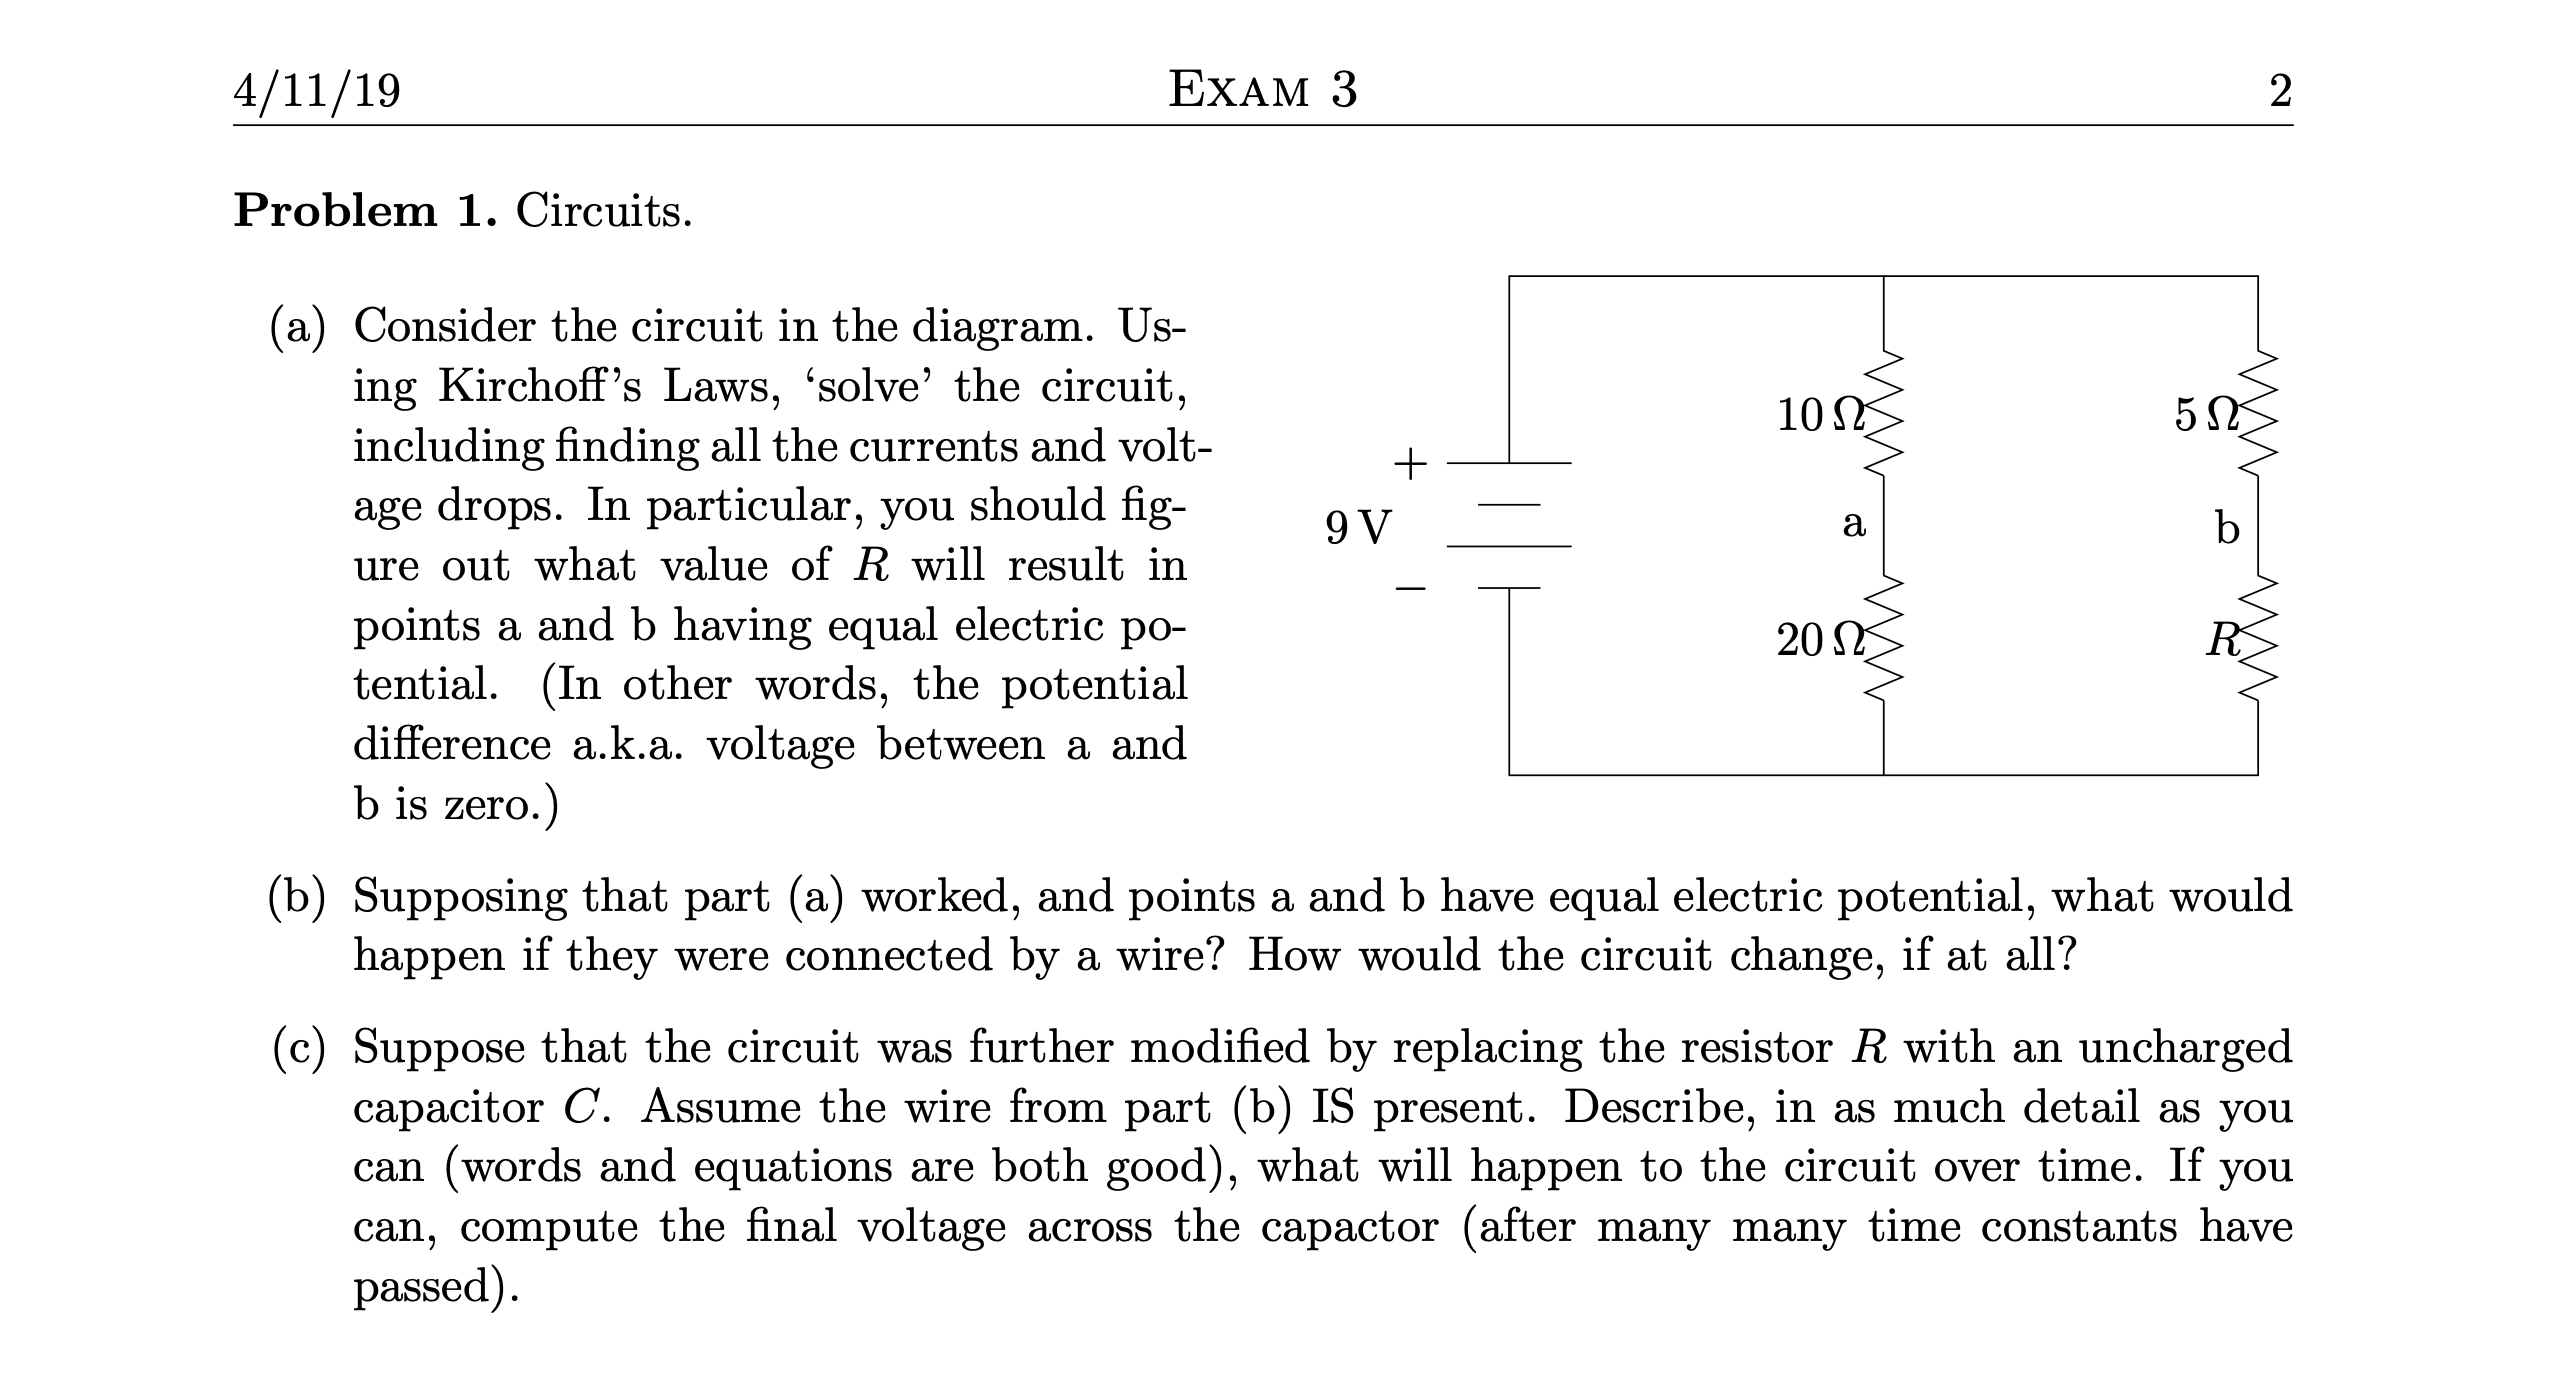 4/11/19
EXAM 3
Problem 1. Circuits.
(a) Consider the circuit in the diagram. Us-
ing Kirchoff's Laws, 'solve' the circuit,
including finding all the currents and volt-
age drops. In particular, you should fig-
ure out what value of R will result in
10
a
b
points a and b having equal electric po-
tential. (In other words, the potential
difference a.k.a. voltage between a and
b is zero.)
20 L
(b) Supposing that part (a) worked, and points a and b have equal electric potential, what would
happen if they were connected by a wire? How would the circuit change, if at all?
(c) Suppose that the circuit was further modified by replacing the resistor R with an uncharged
capacitor C. Assume the wire from part (b) IS present. Describe, in as much detail as you
can (words and equations are both good), what will happen to the circuit over time. If you
can, compute the final voltage across the capactor (after many many time constants have
passed).
